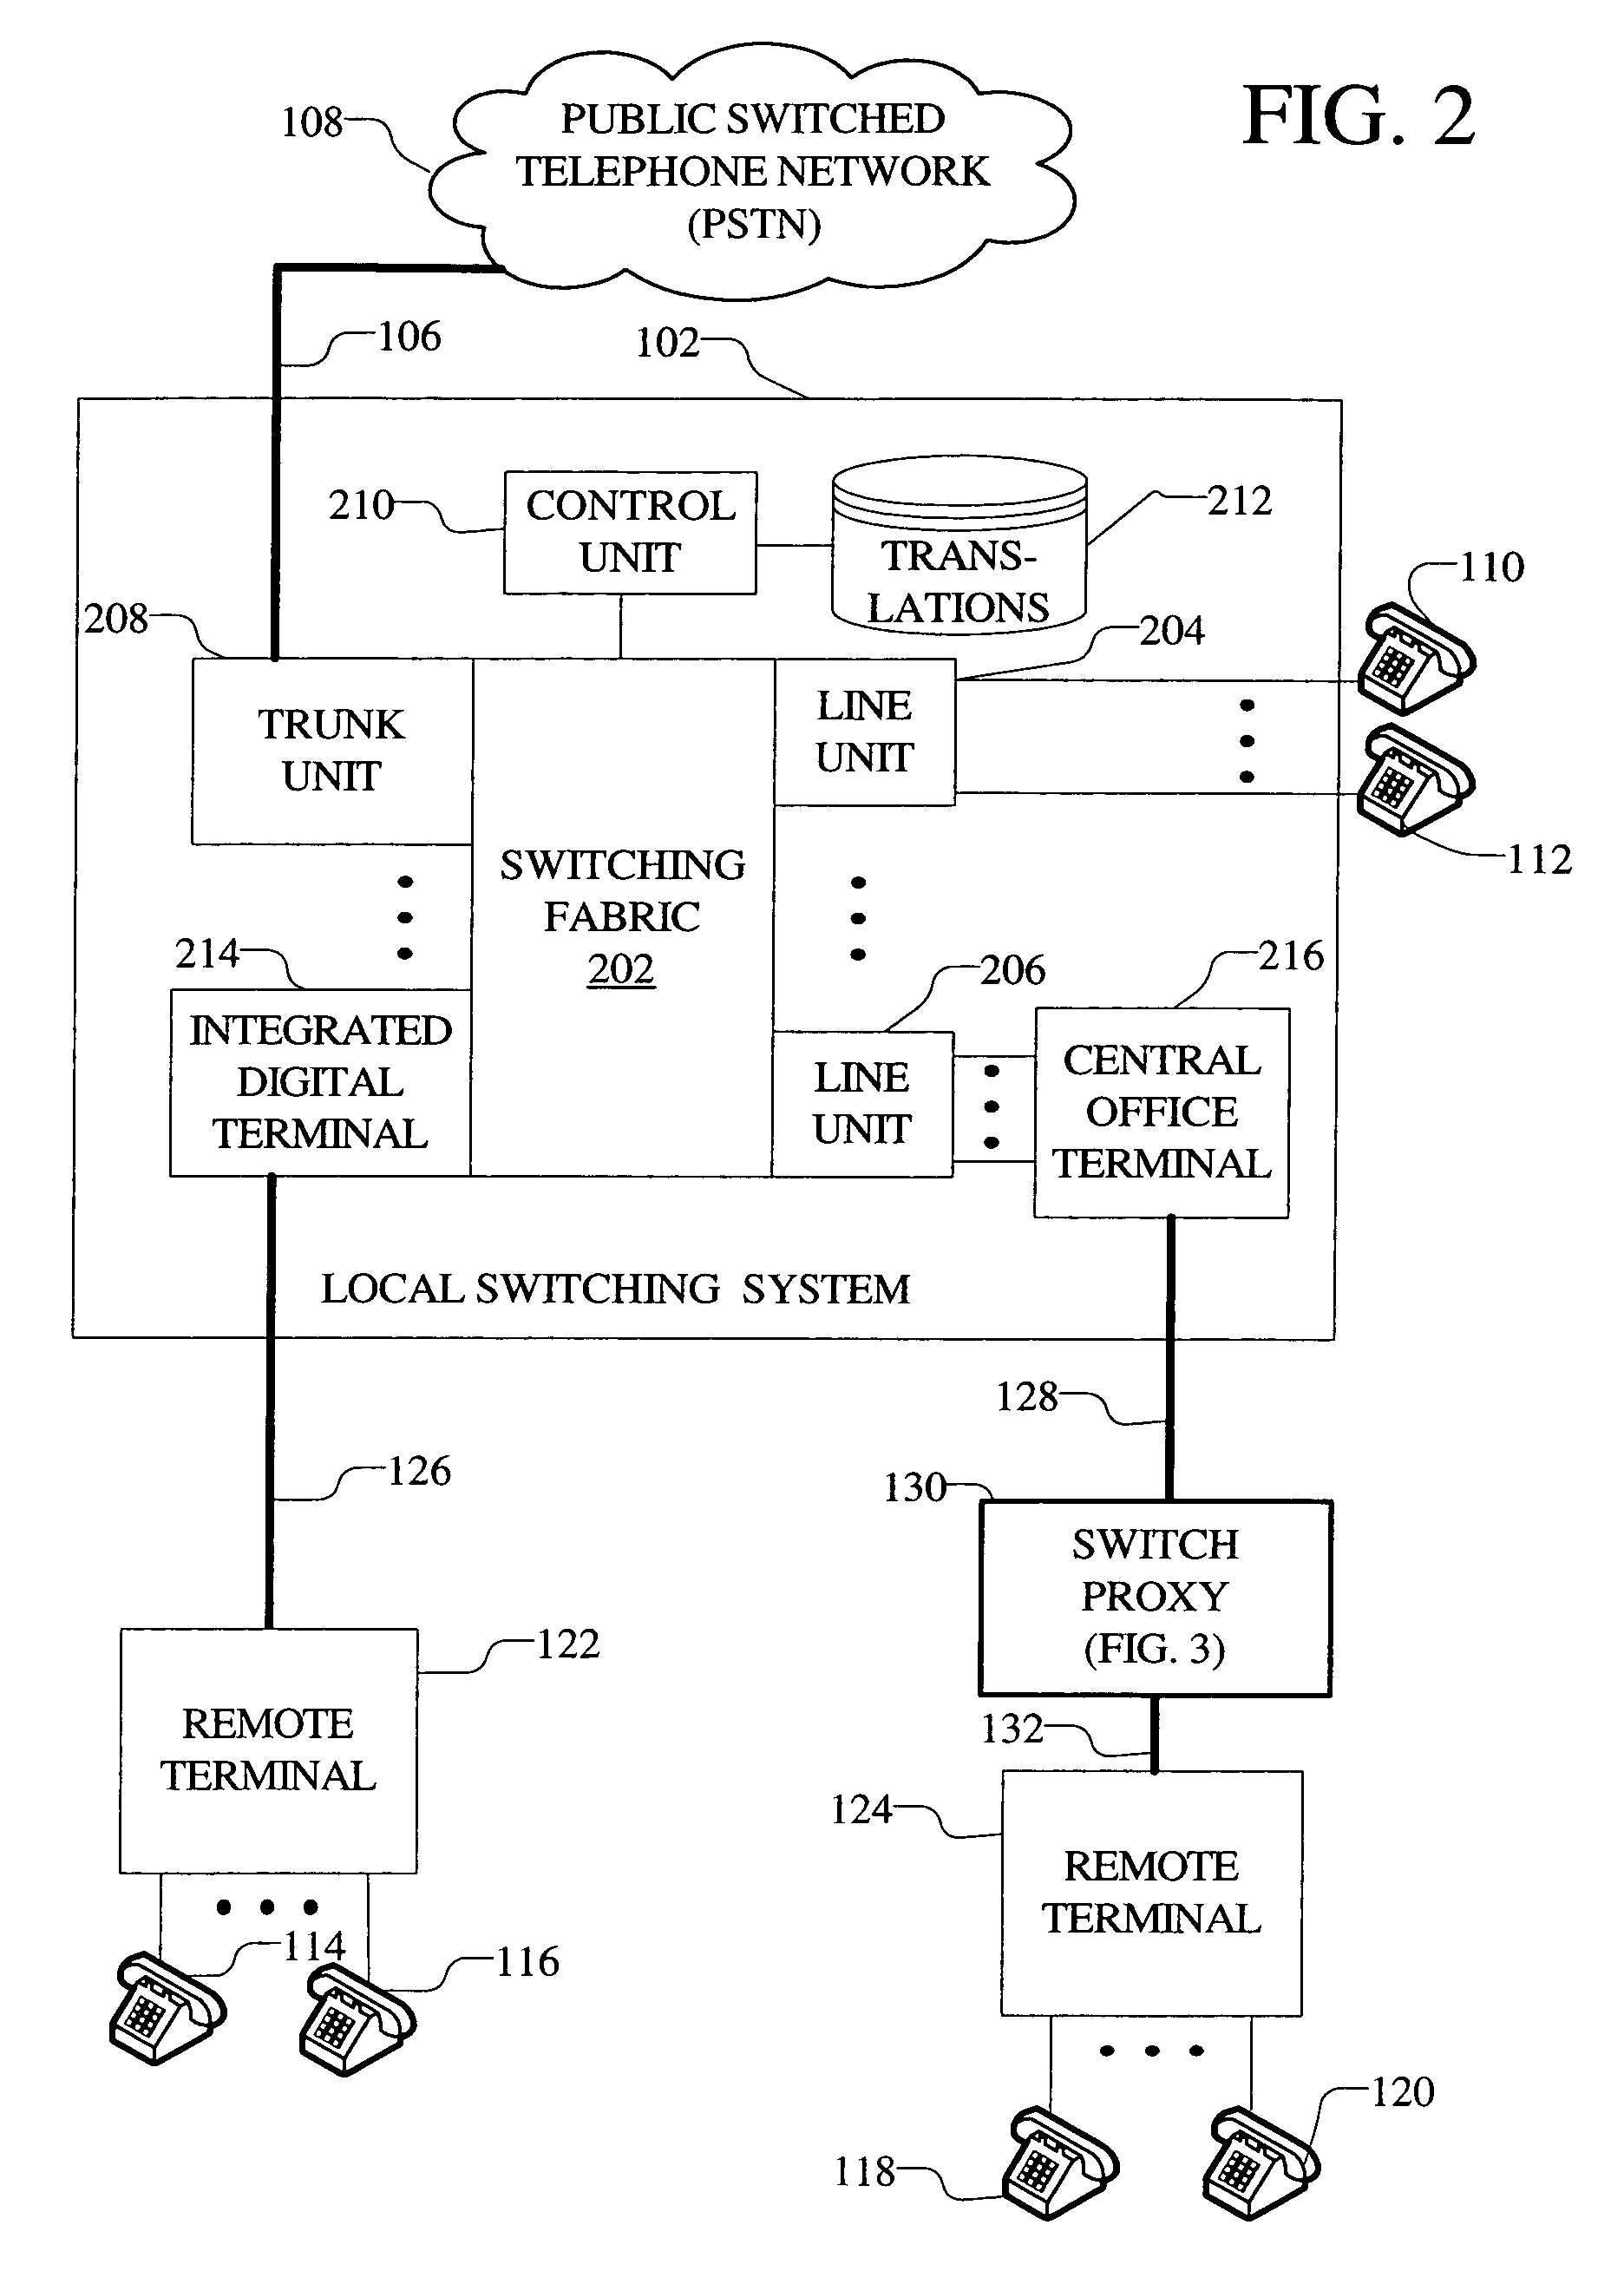 Switch proxy for providing emergency stand alone service in remote access systems